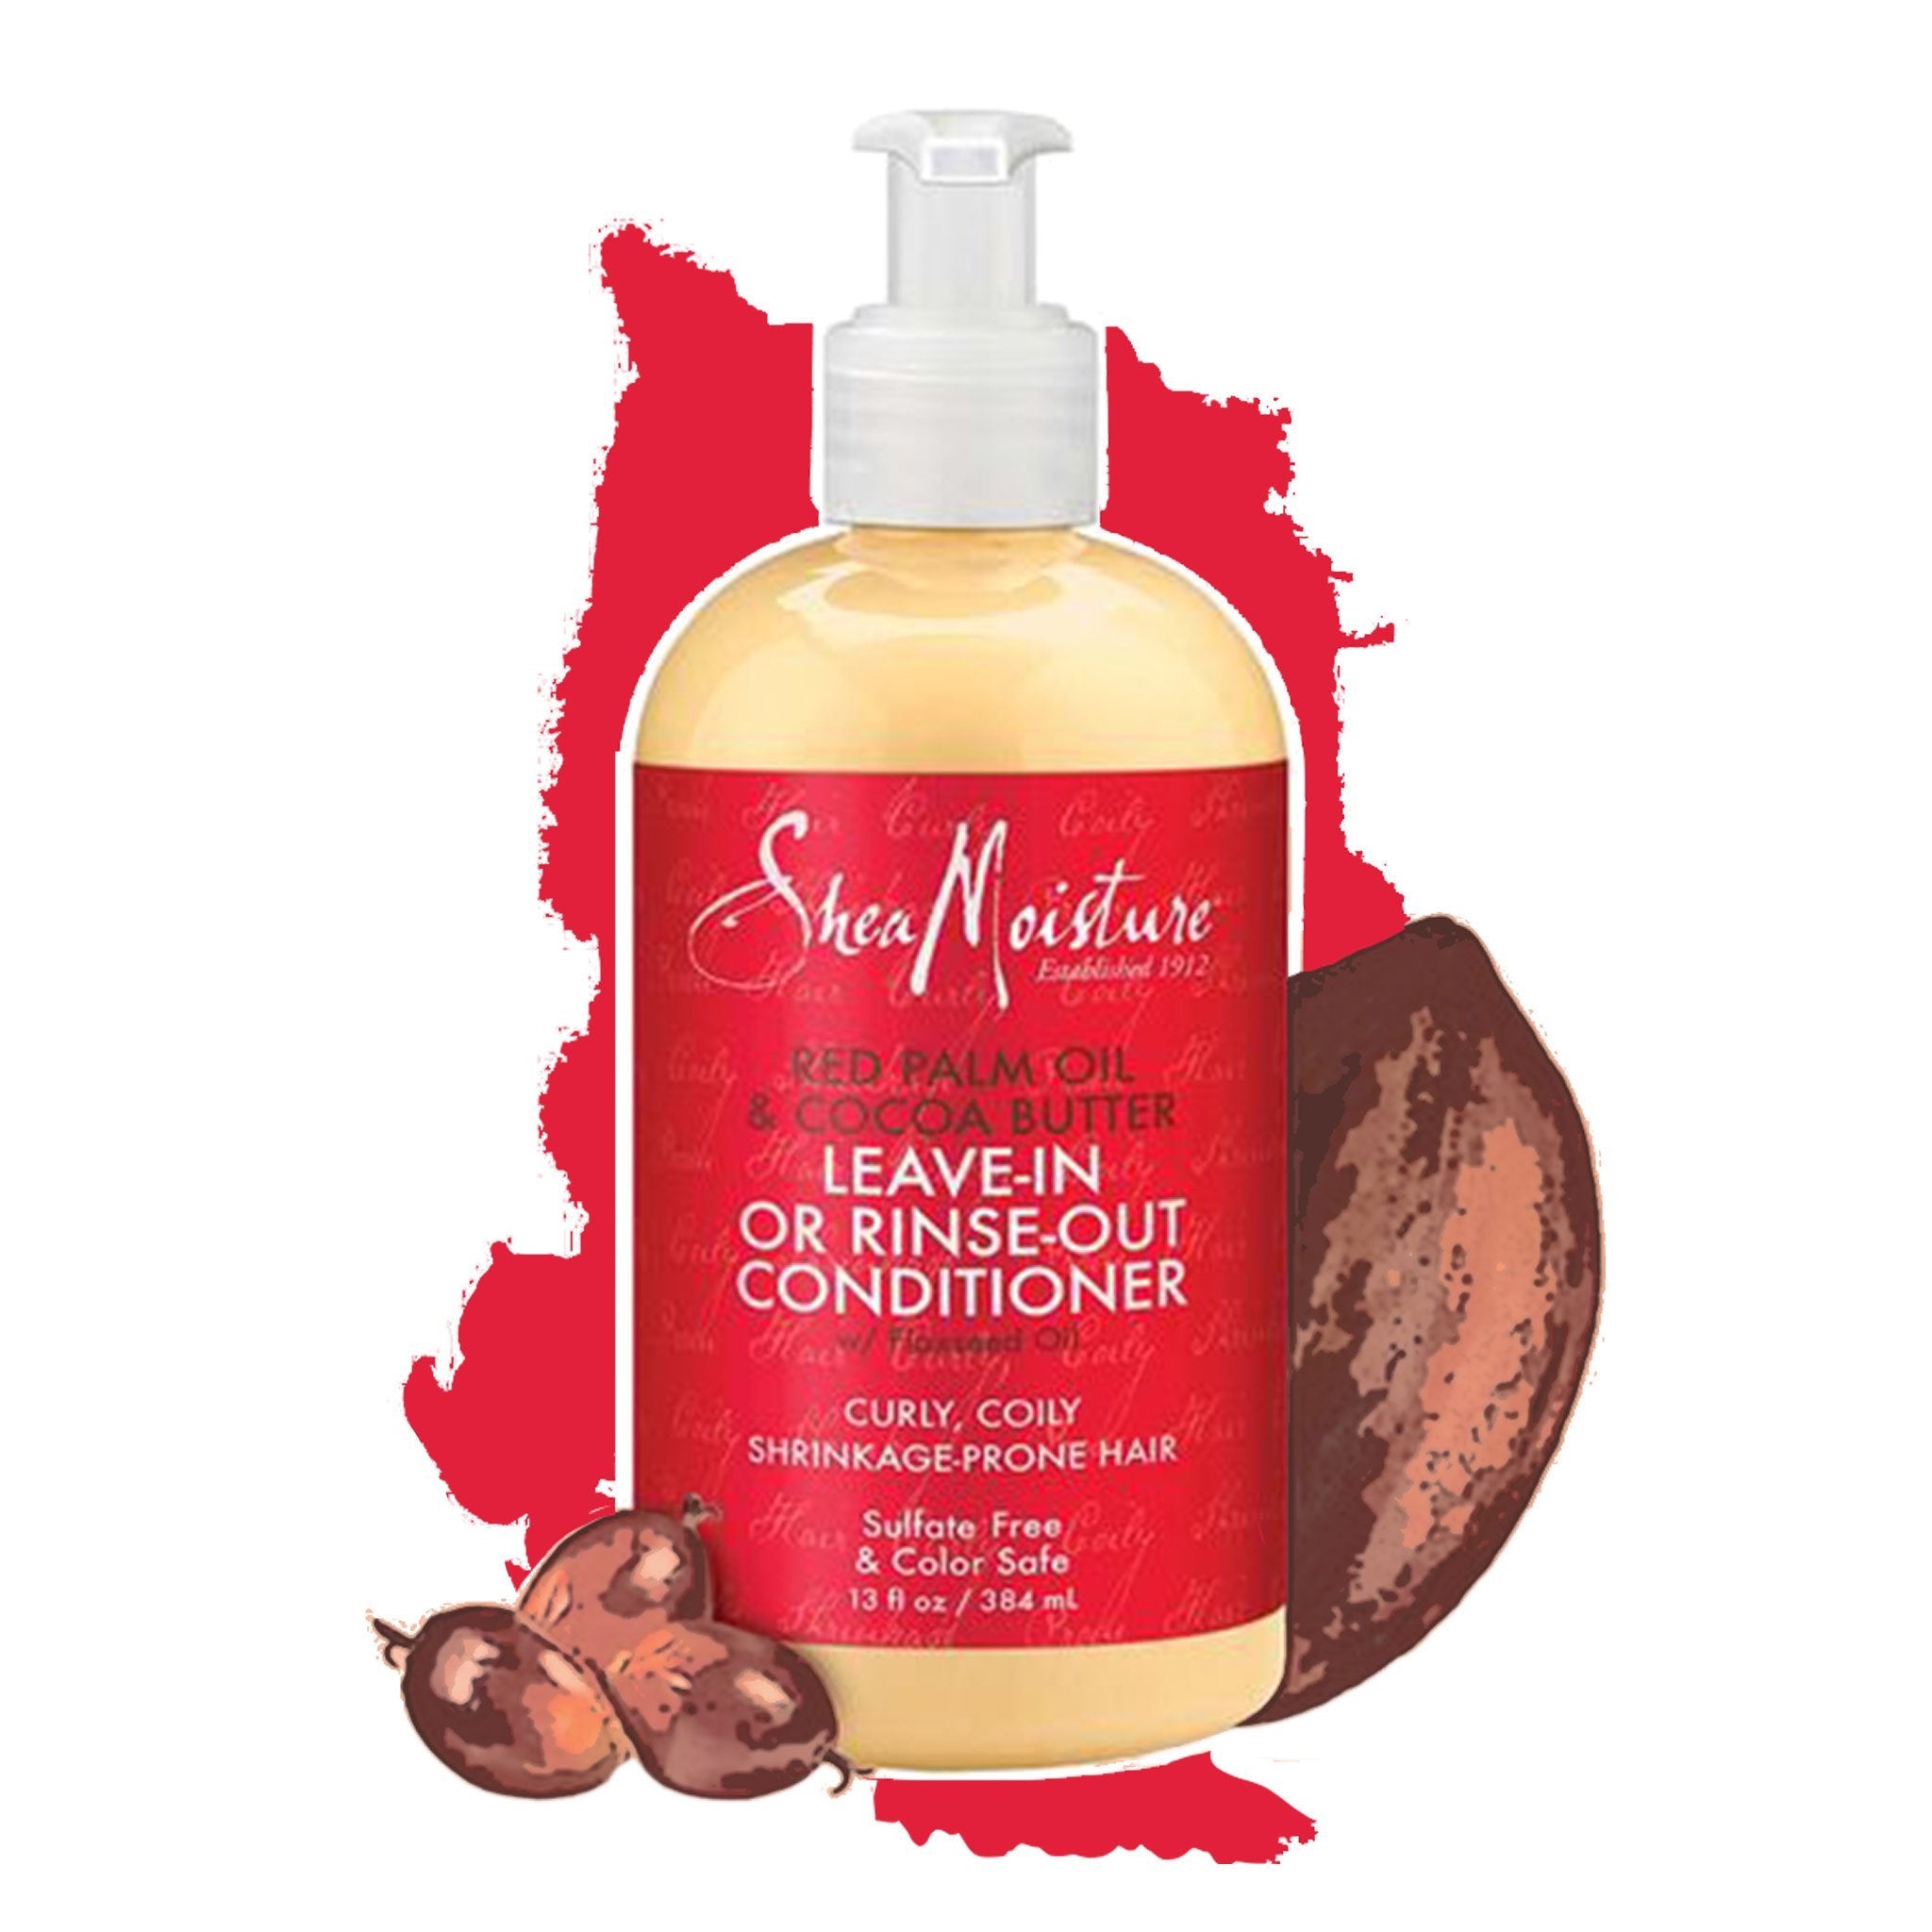 Shea Moisture | RED PALM OIL & COCOA BUTTER RINS OUT OR LEAVE IN CONDITIONER - lockenkopf